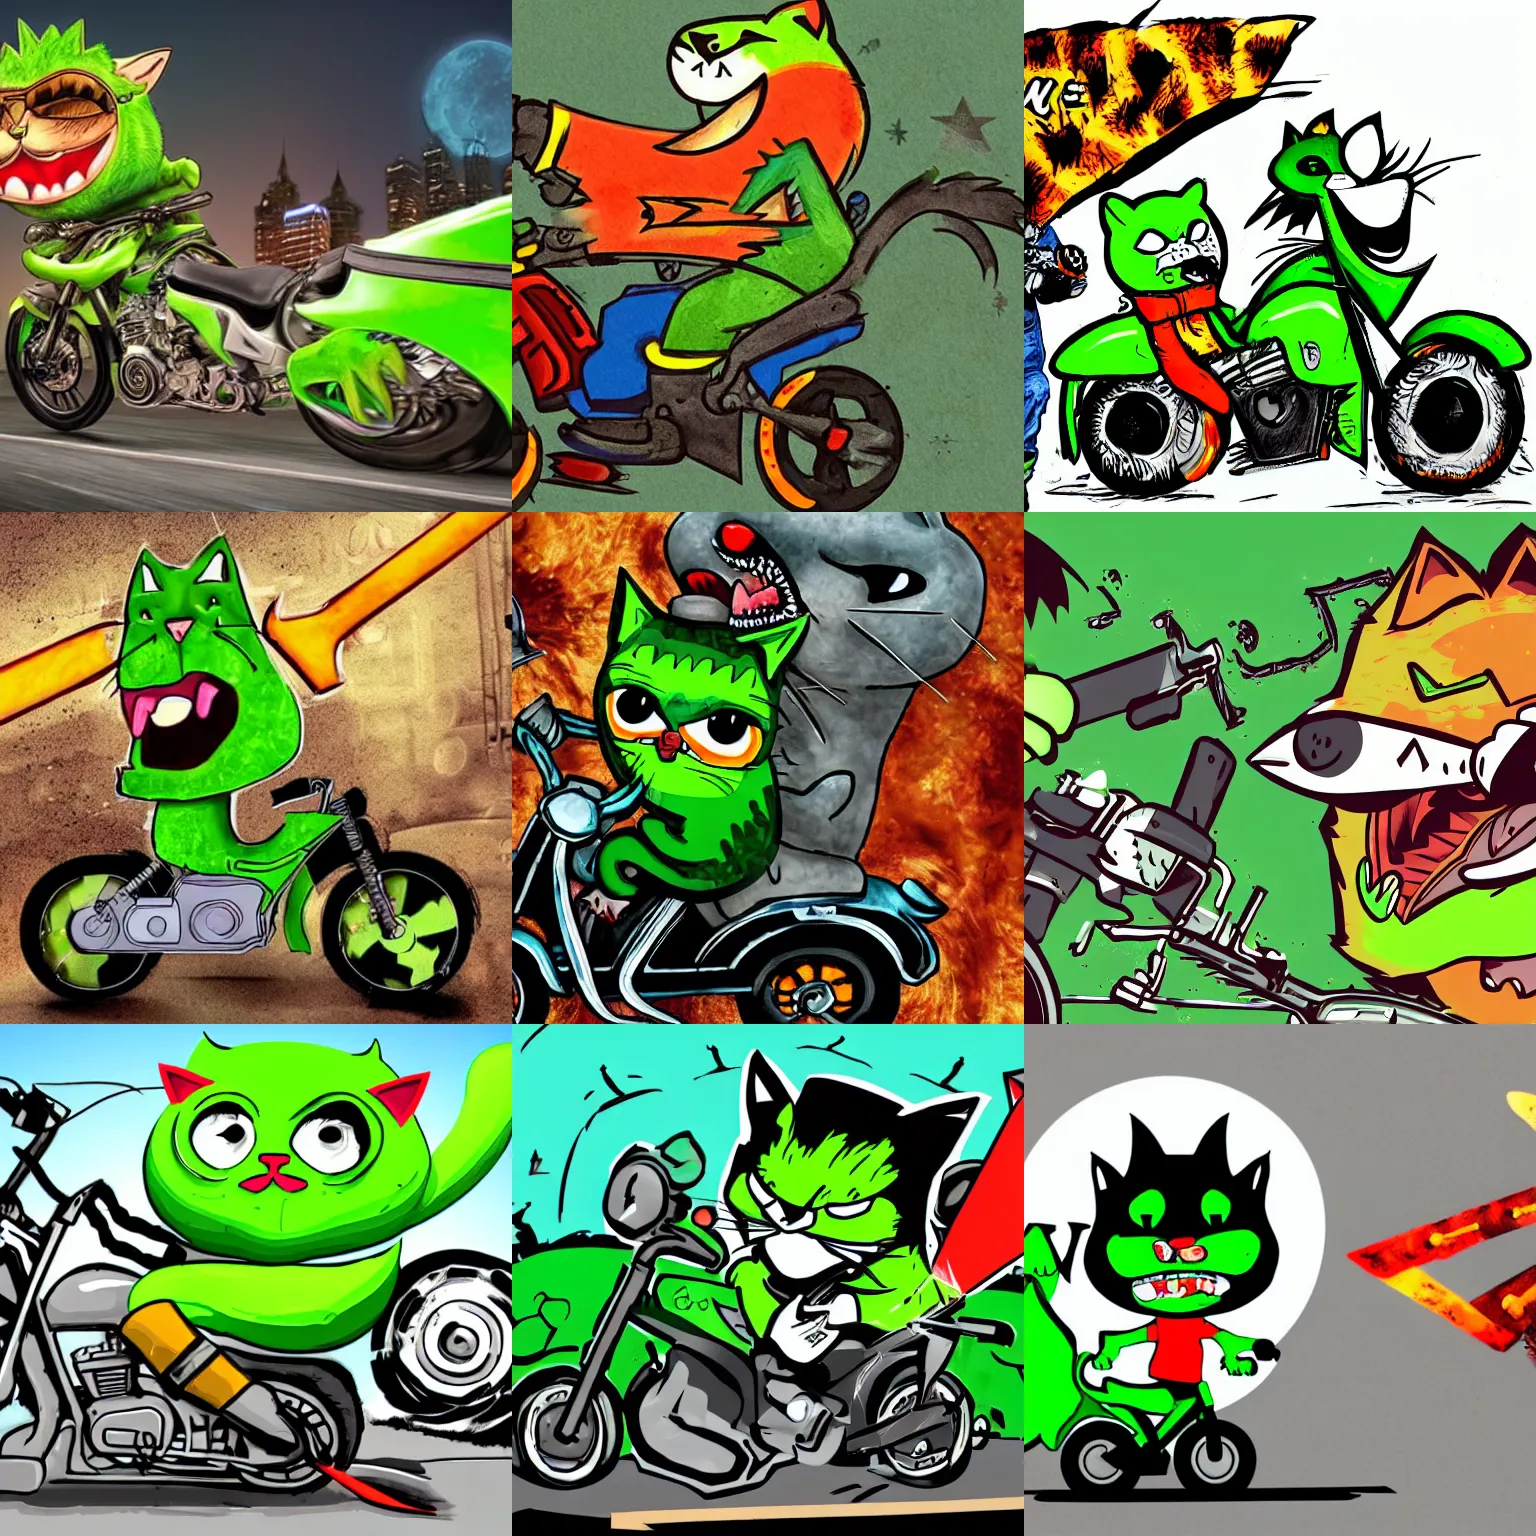 Prompt: a picture with an angry green cat riding a motorcycle with chainsaws on the side